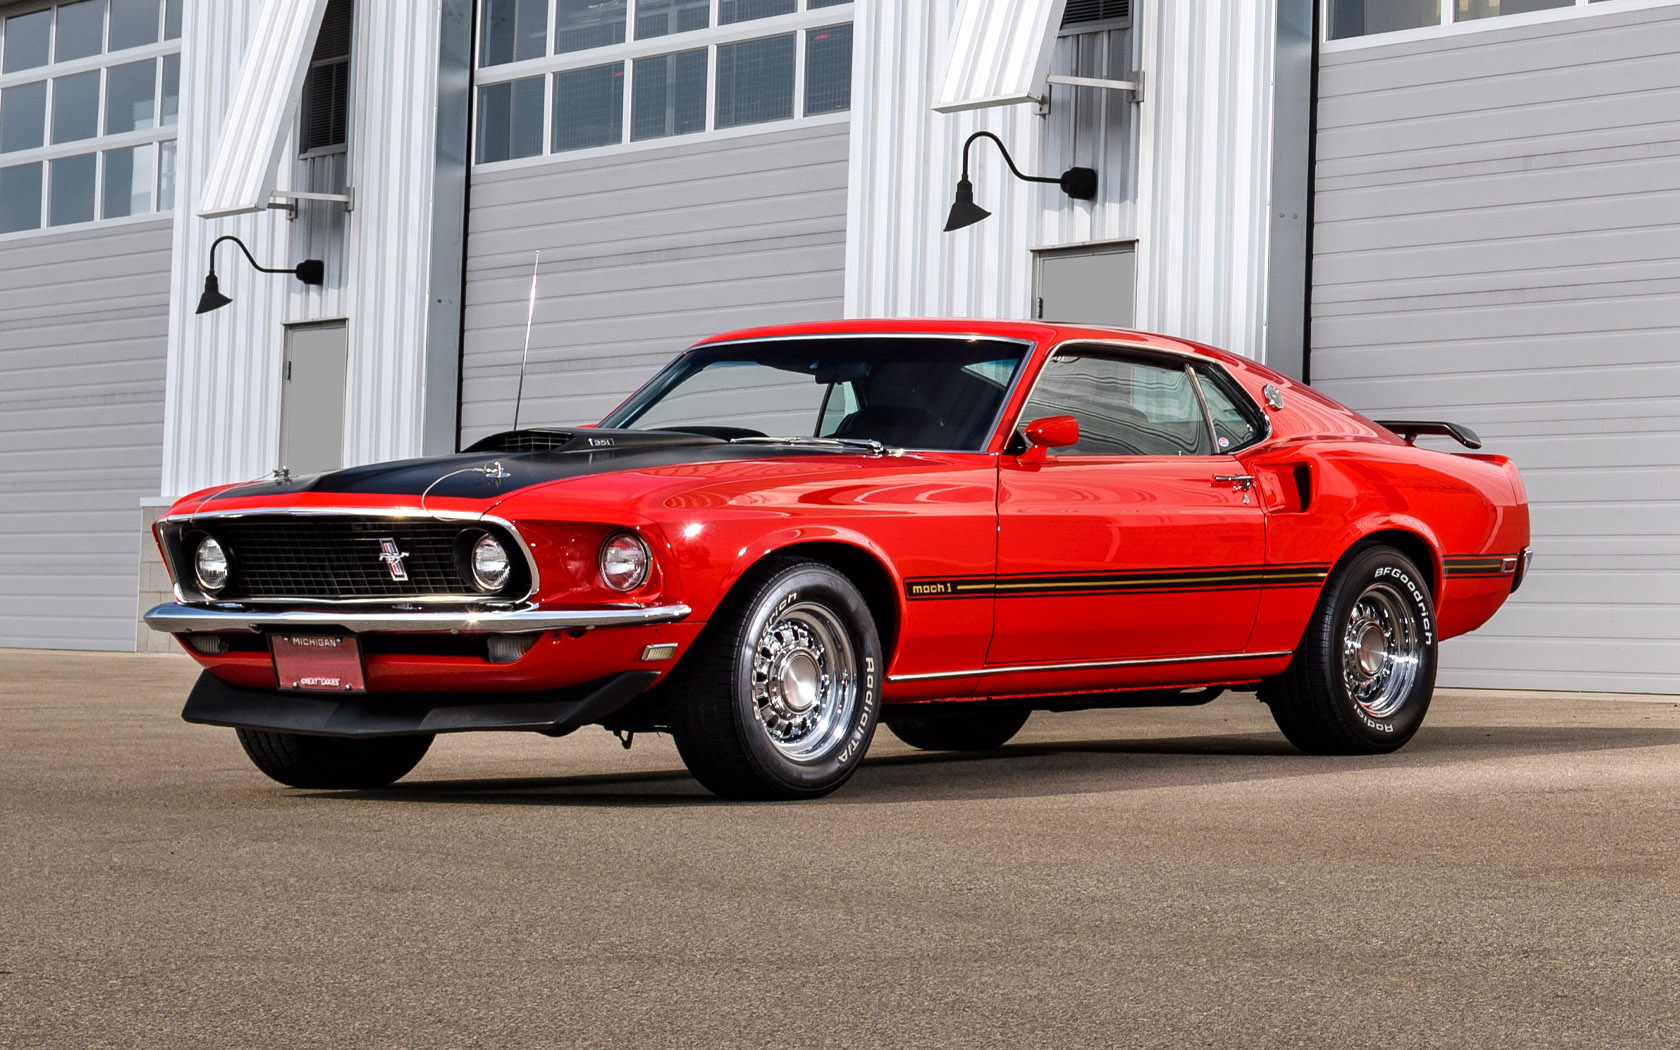 The Story Of The Original Mustang The Era When Performance Peaked